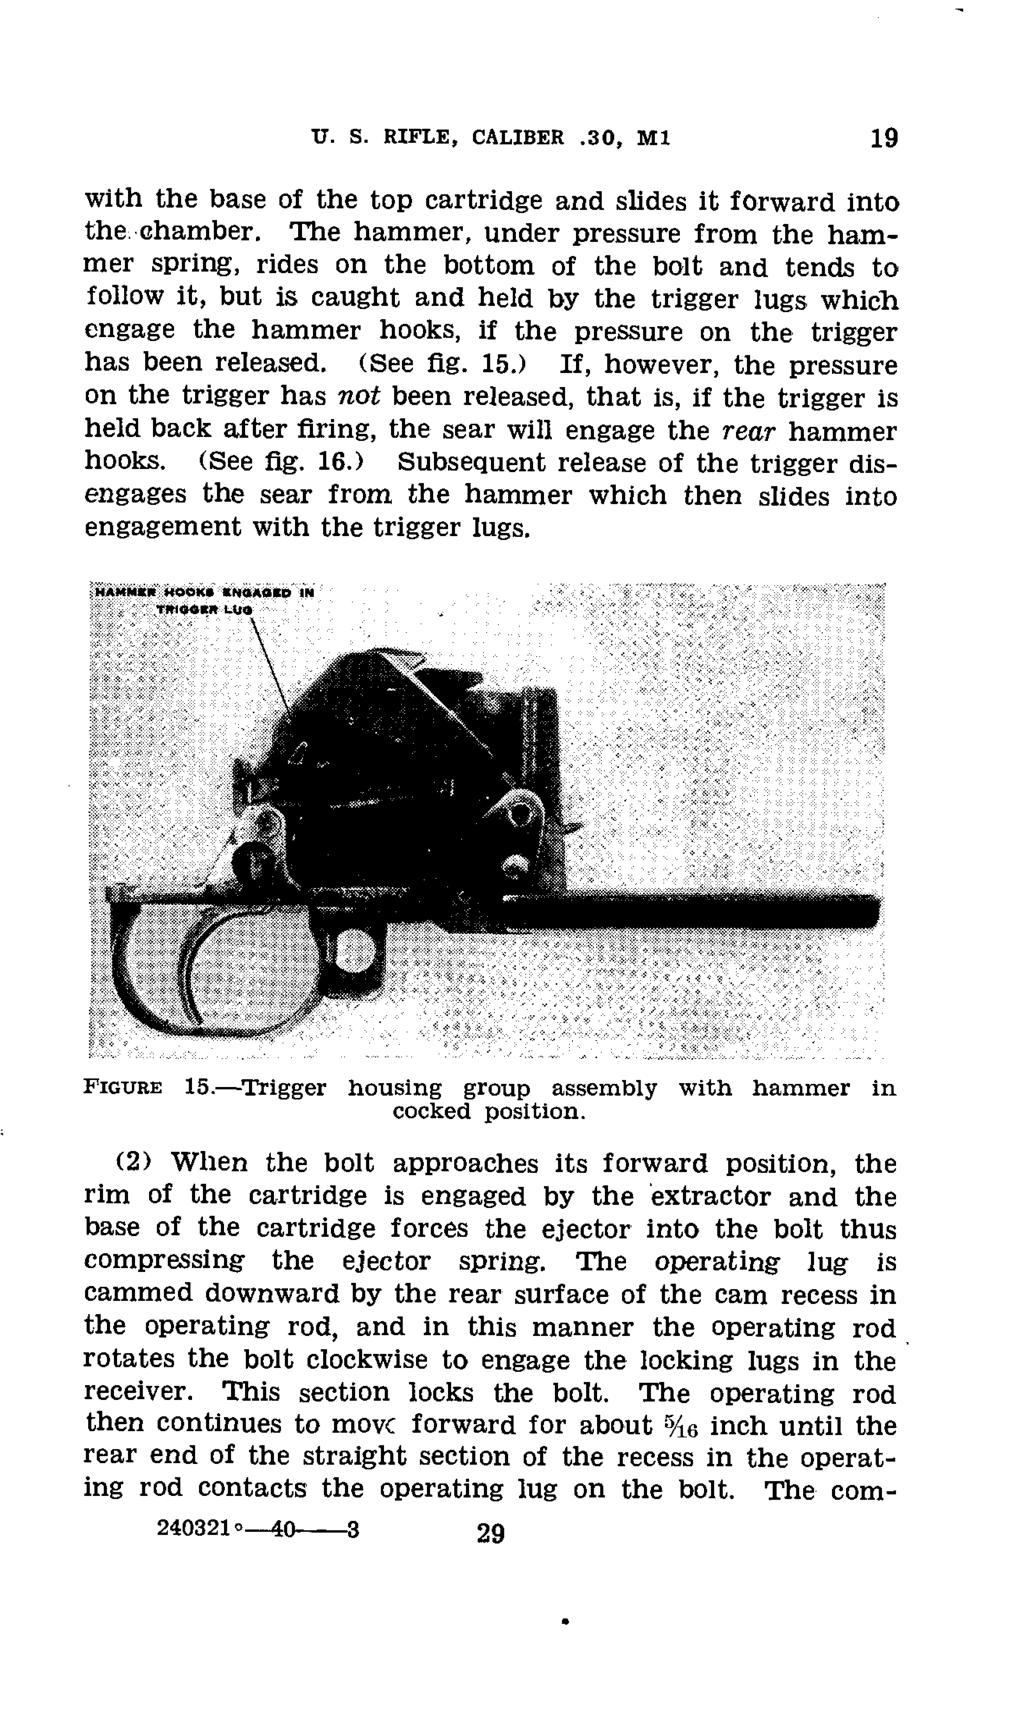 U. S. RIFLE, CALIBER.30, M1 19 with the base of the top cartridge and slides it forward into the chamber.